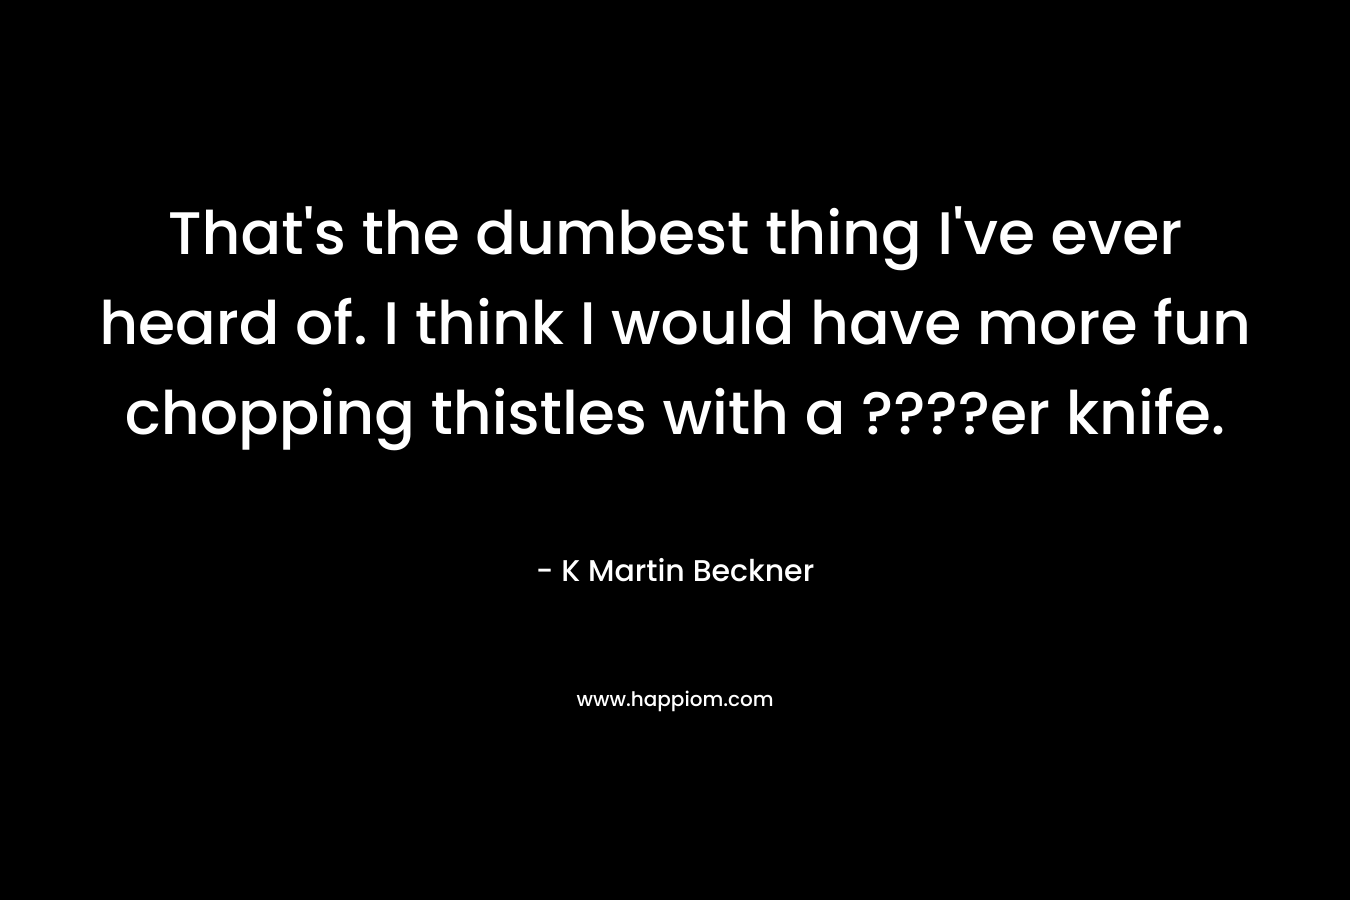 That’s the dumbest thing I’ve ever heard of. I think I would have more fun chopping thistles with a ????er knife. – K Martin Beckner